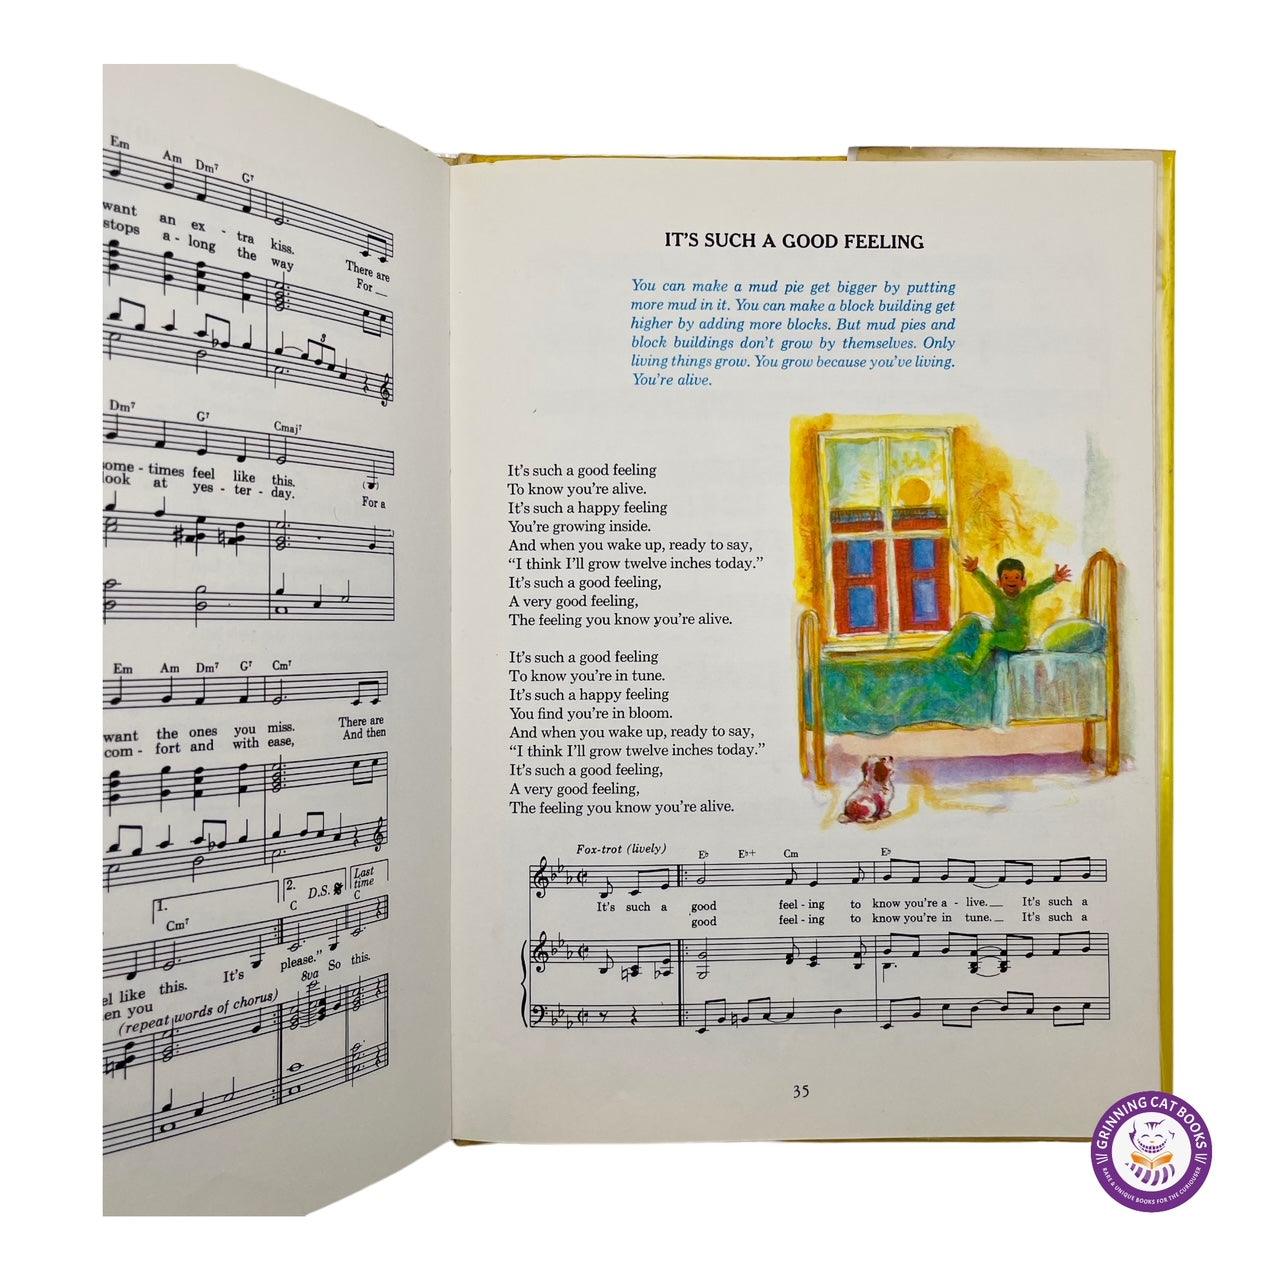 Mr. Rogers' Songbook (First Edition with illustrations by Steven Kellogg) - Grinning Cat Books - books - ILLUSTRATED BOOKS